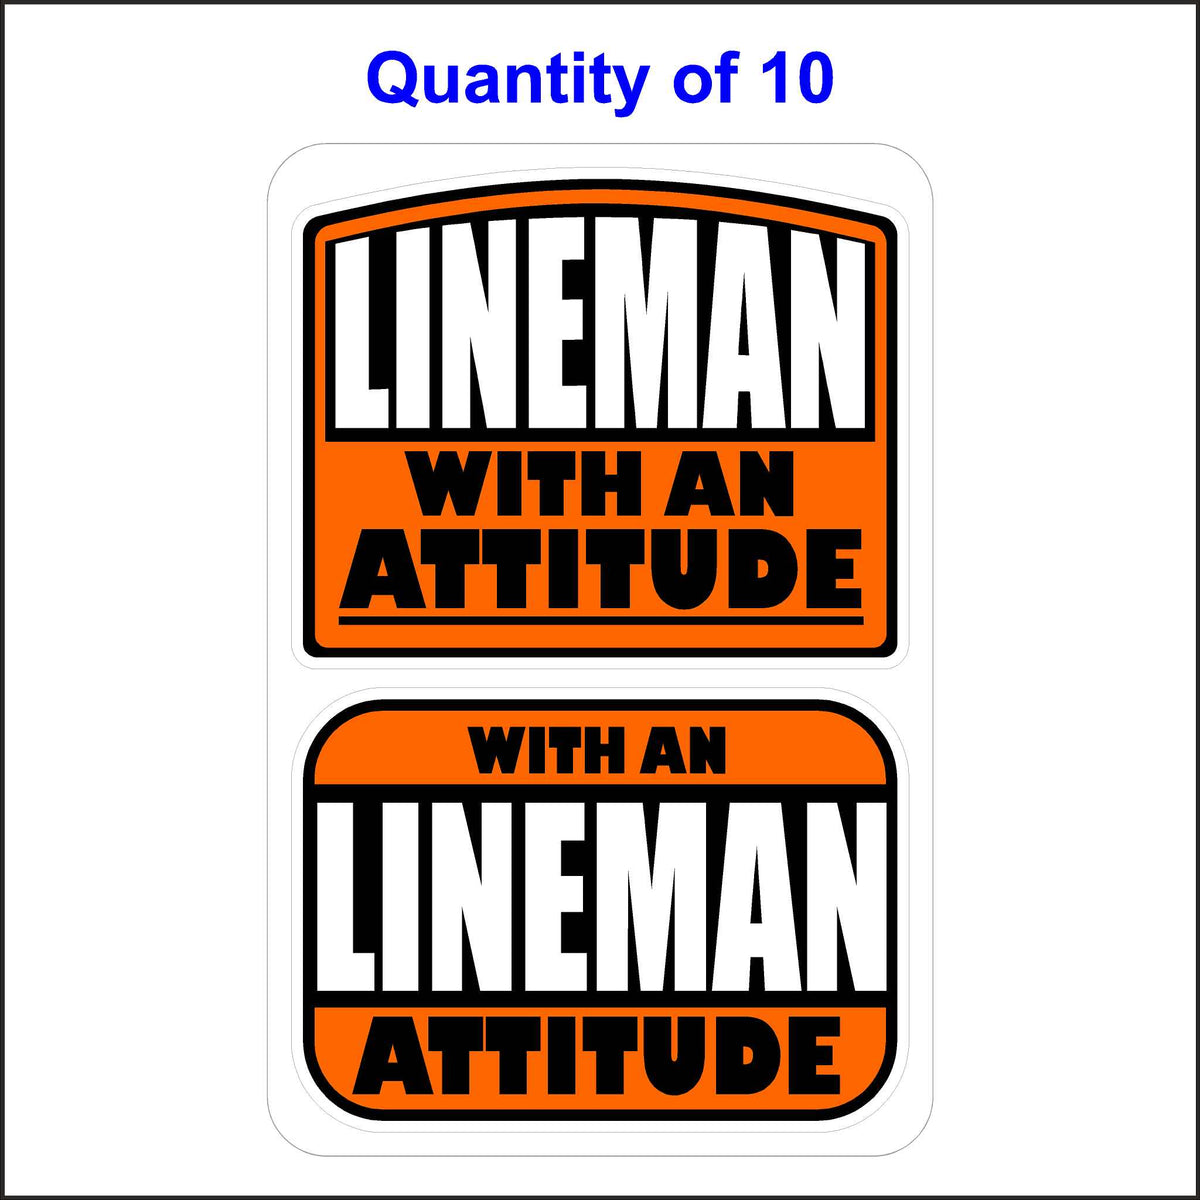 Lineman With An Attitude Stickers 10 Quantity.